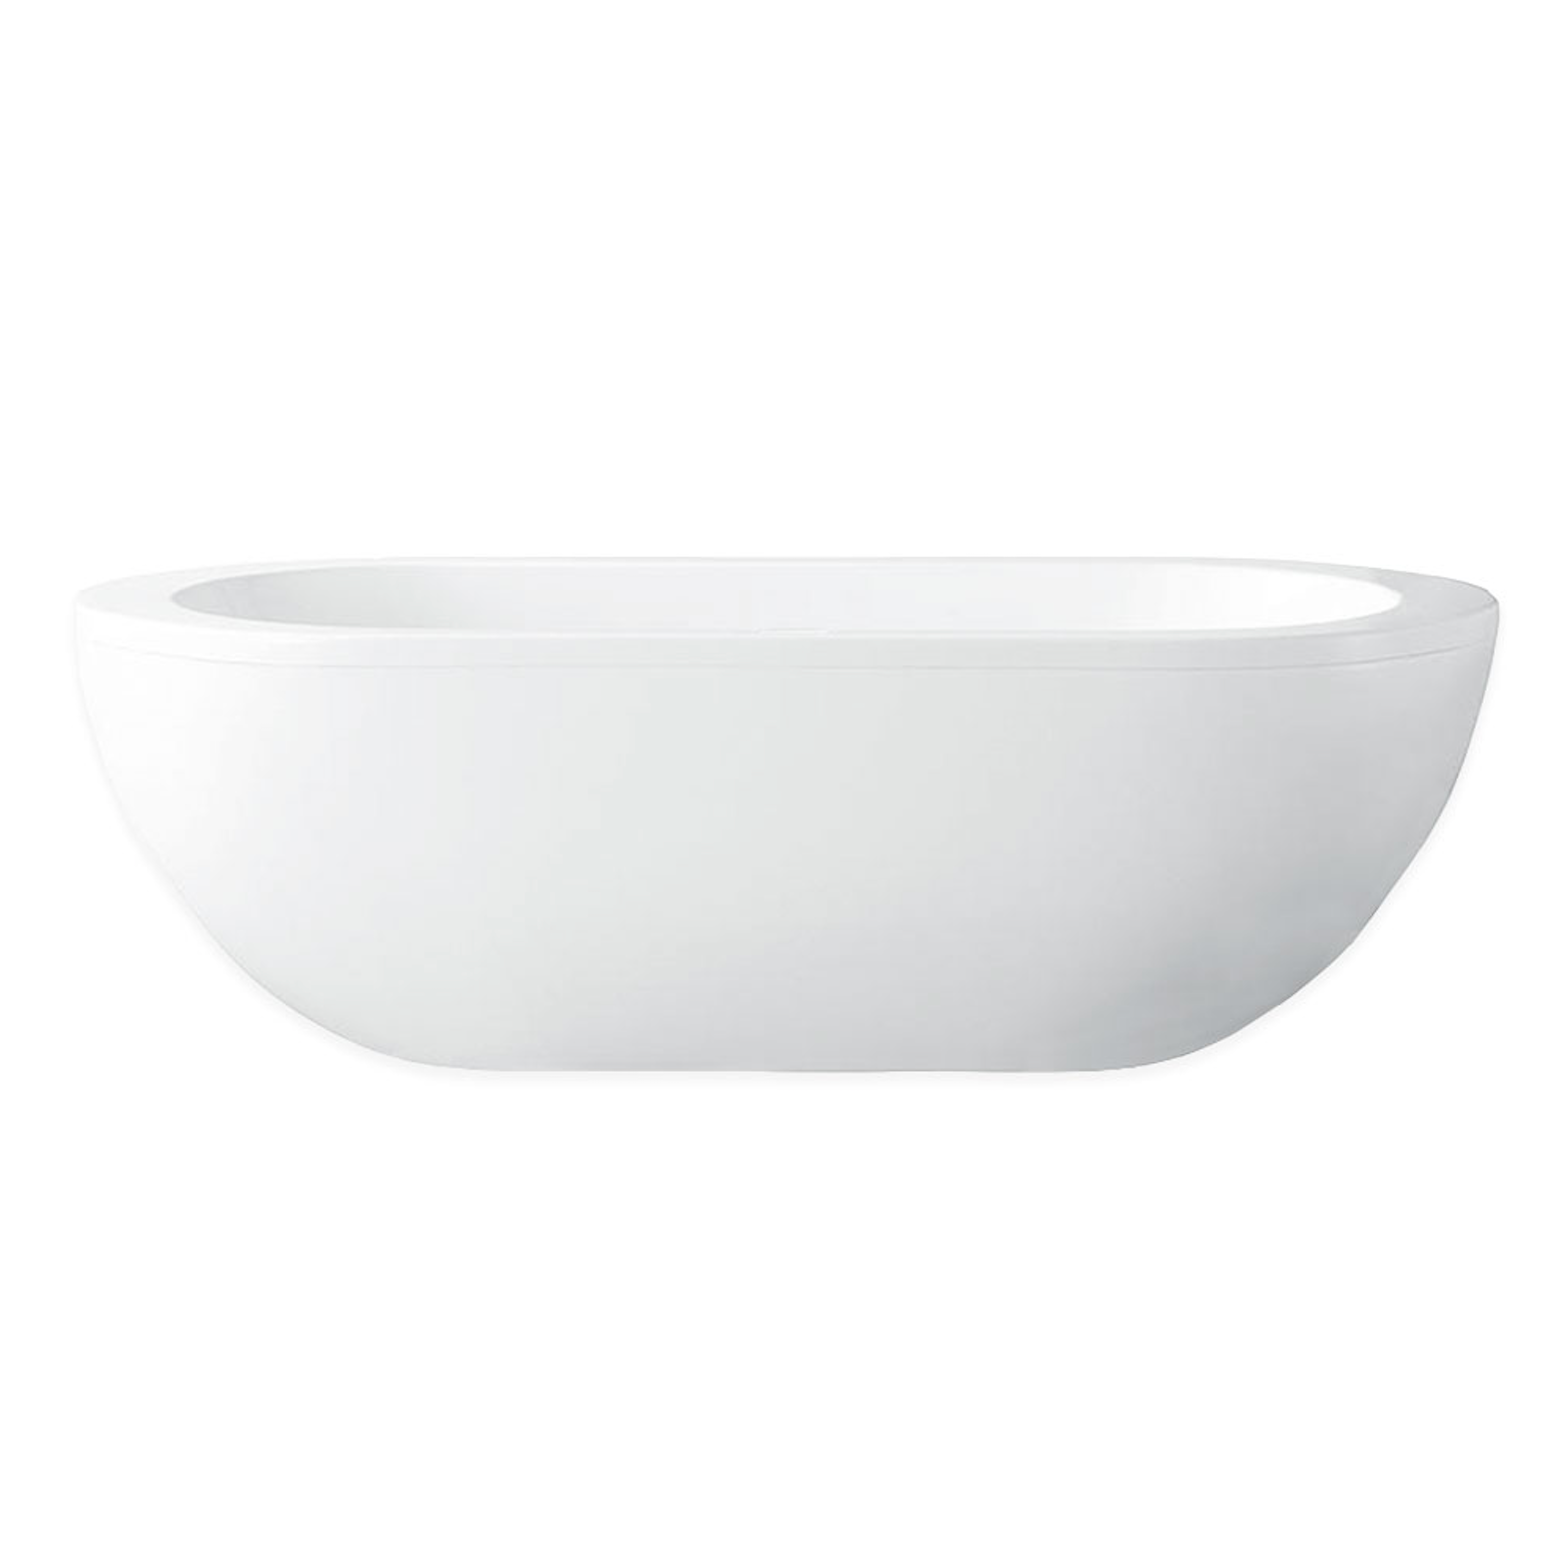 72" Acrylic Center Drain Oval Double Ended Flatbottom Freestanding Bathtub in Glossy White